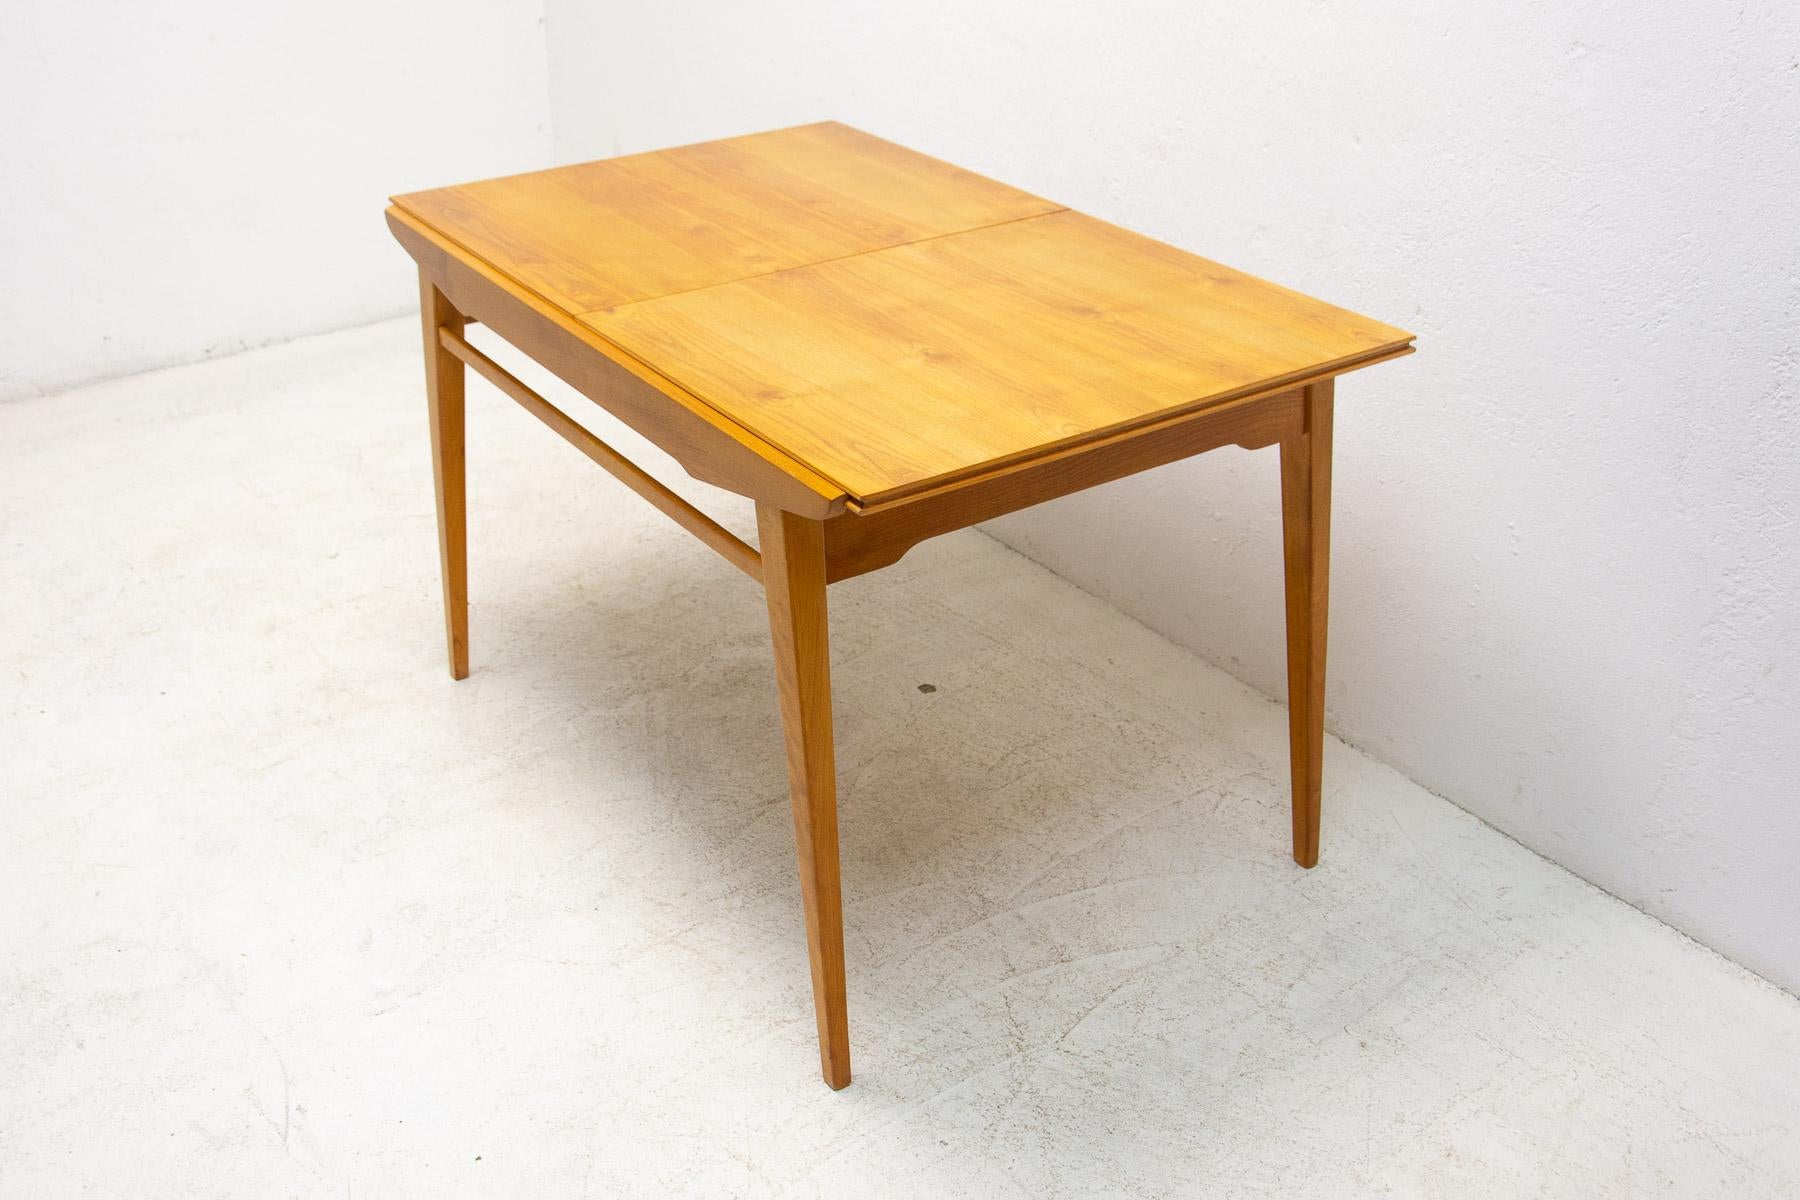 Czech Midcentury Folding Dining Table by Bohumil Landsman for Jitona, 1970s For Sale